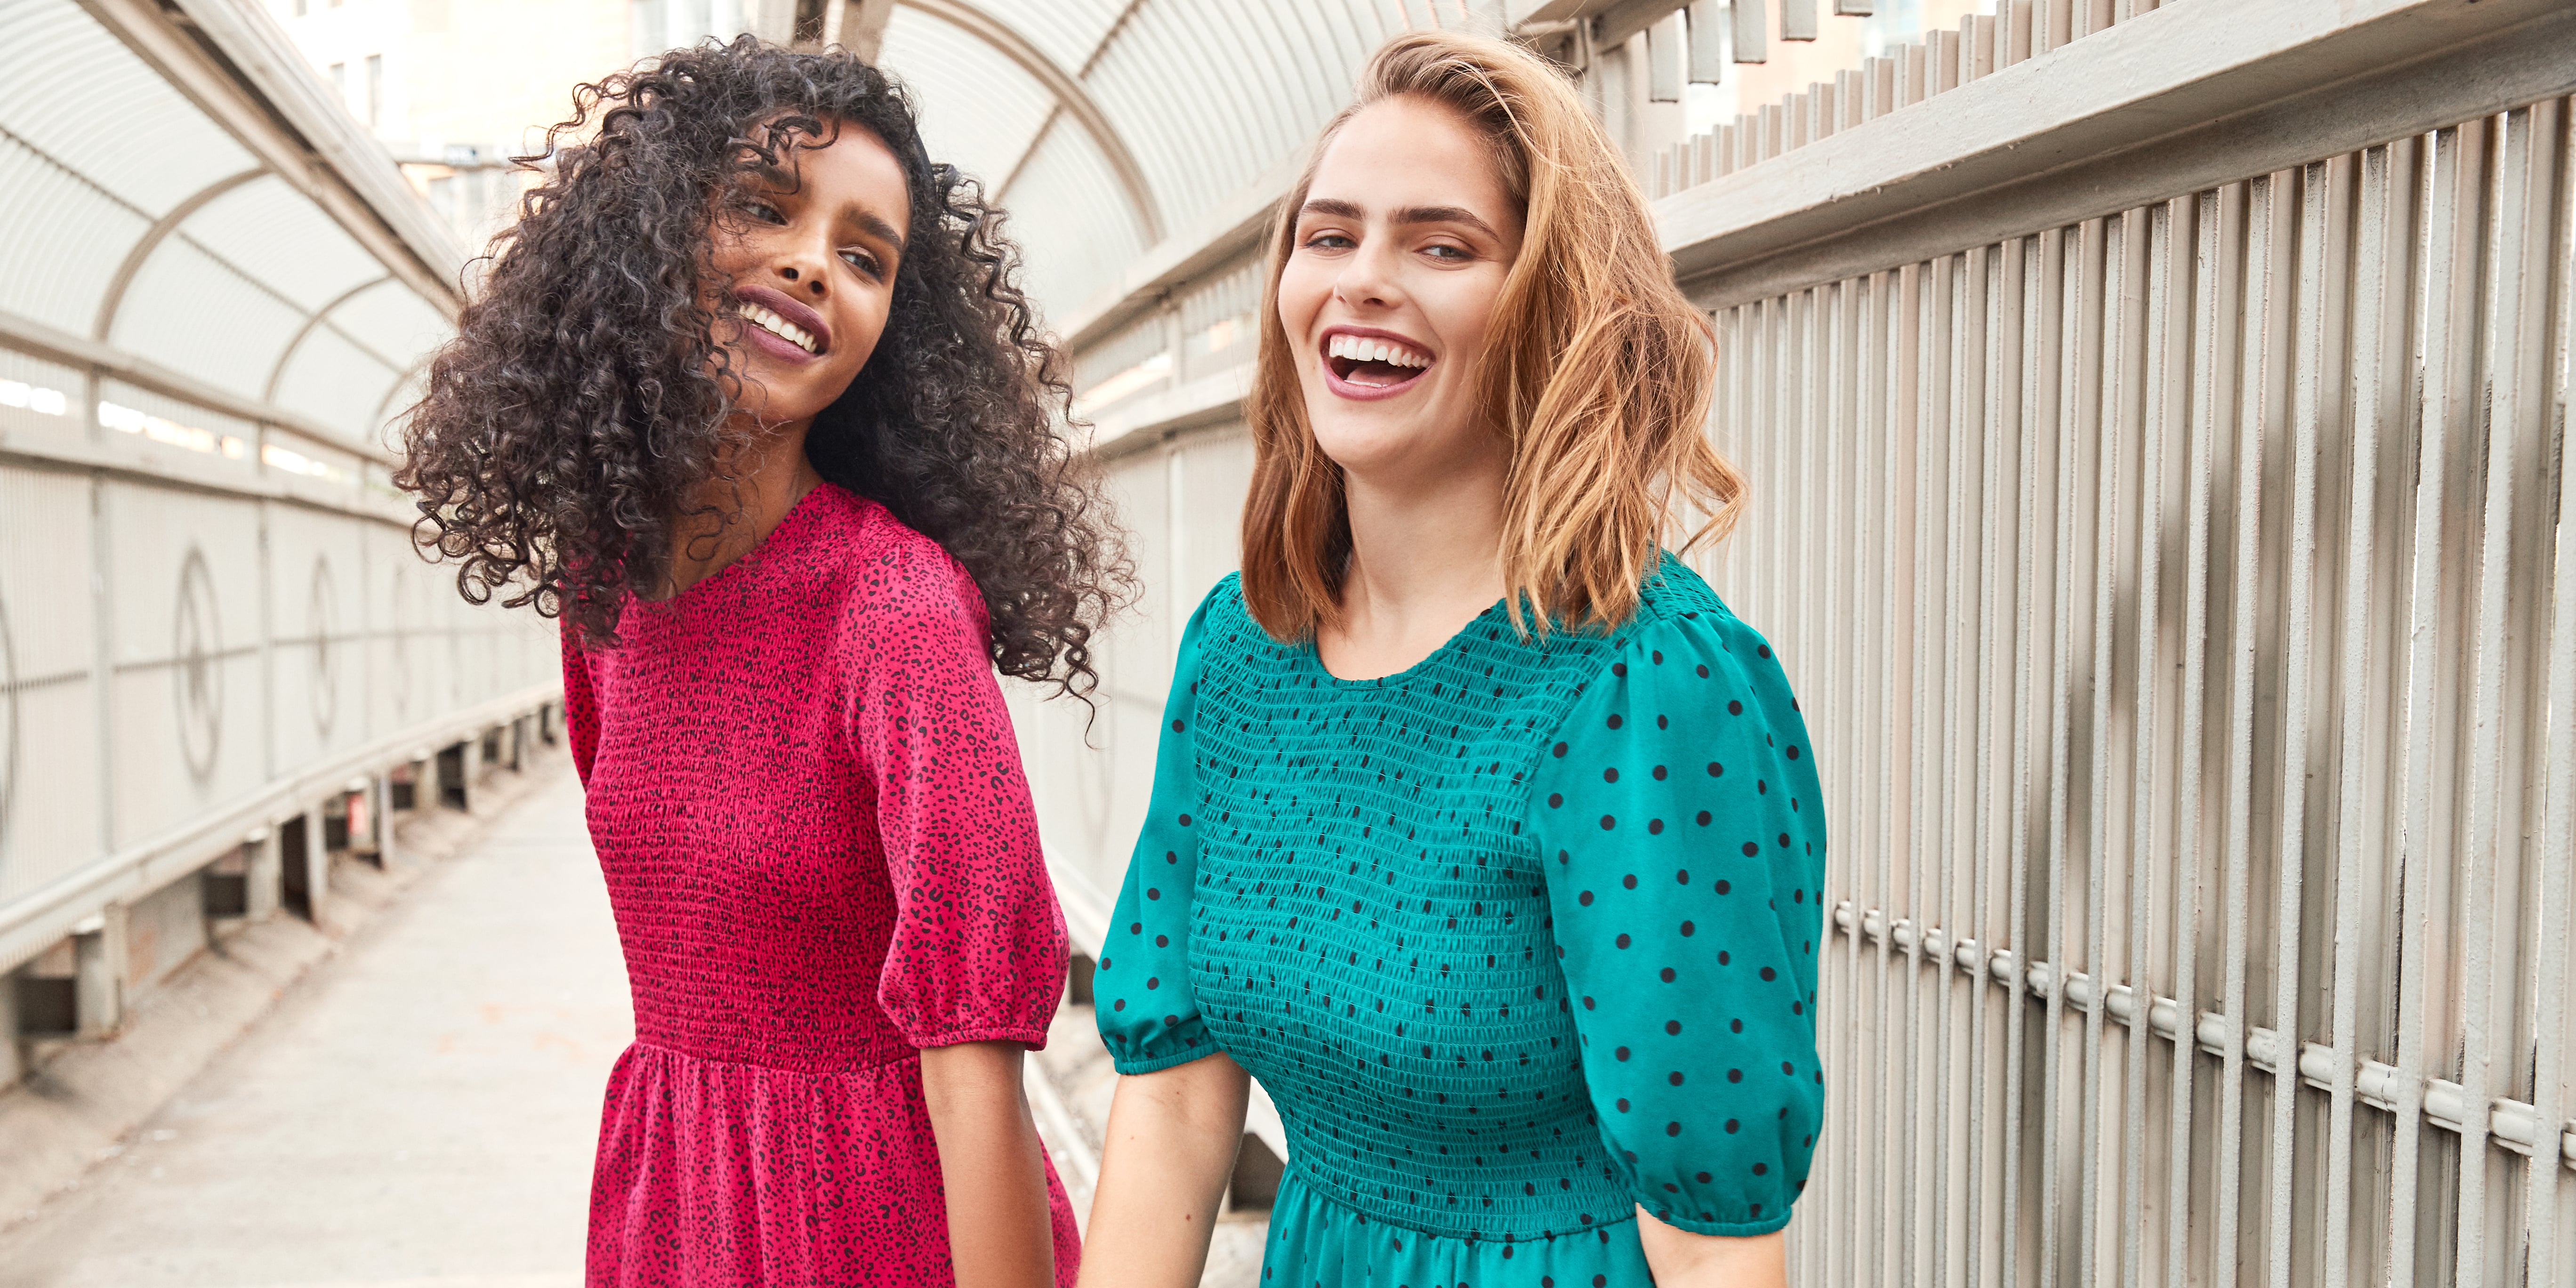 Cheap Holiday Party Dresses From POPSUGAR at Kohl's